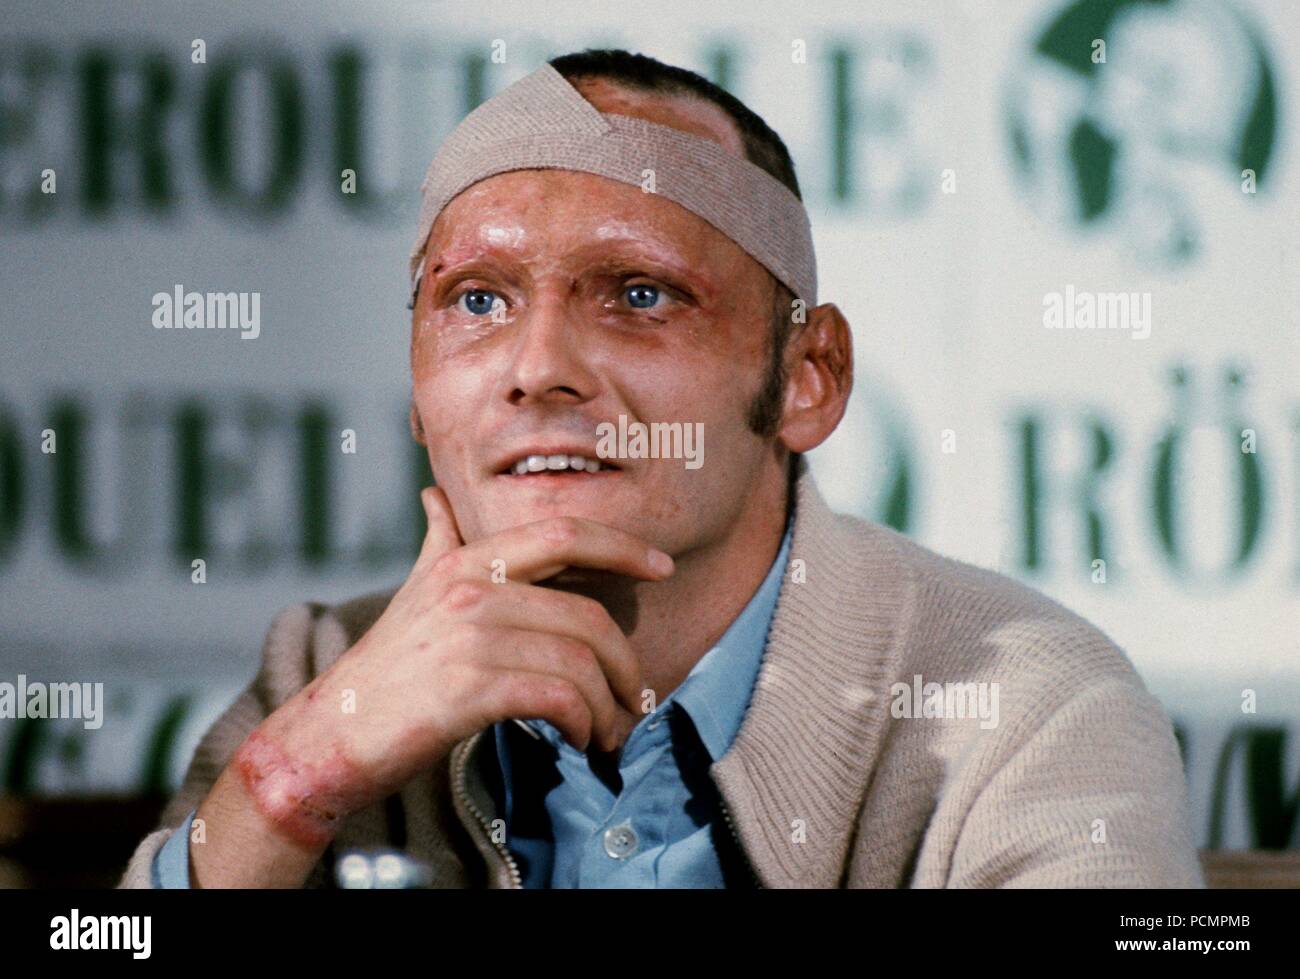 The Austrian Formula 1 driver Niki Lauda with scarred face, head bandage  and burns during a press conference in Salzburg on September 8, 1976. Lauda,  who had suffered the serious injuries in